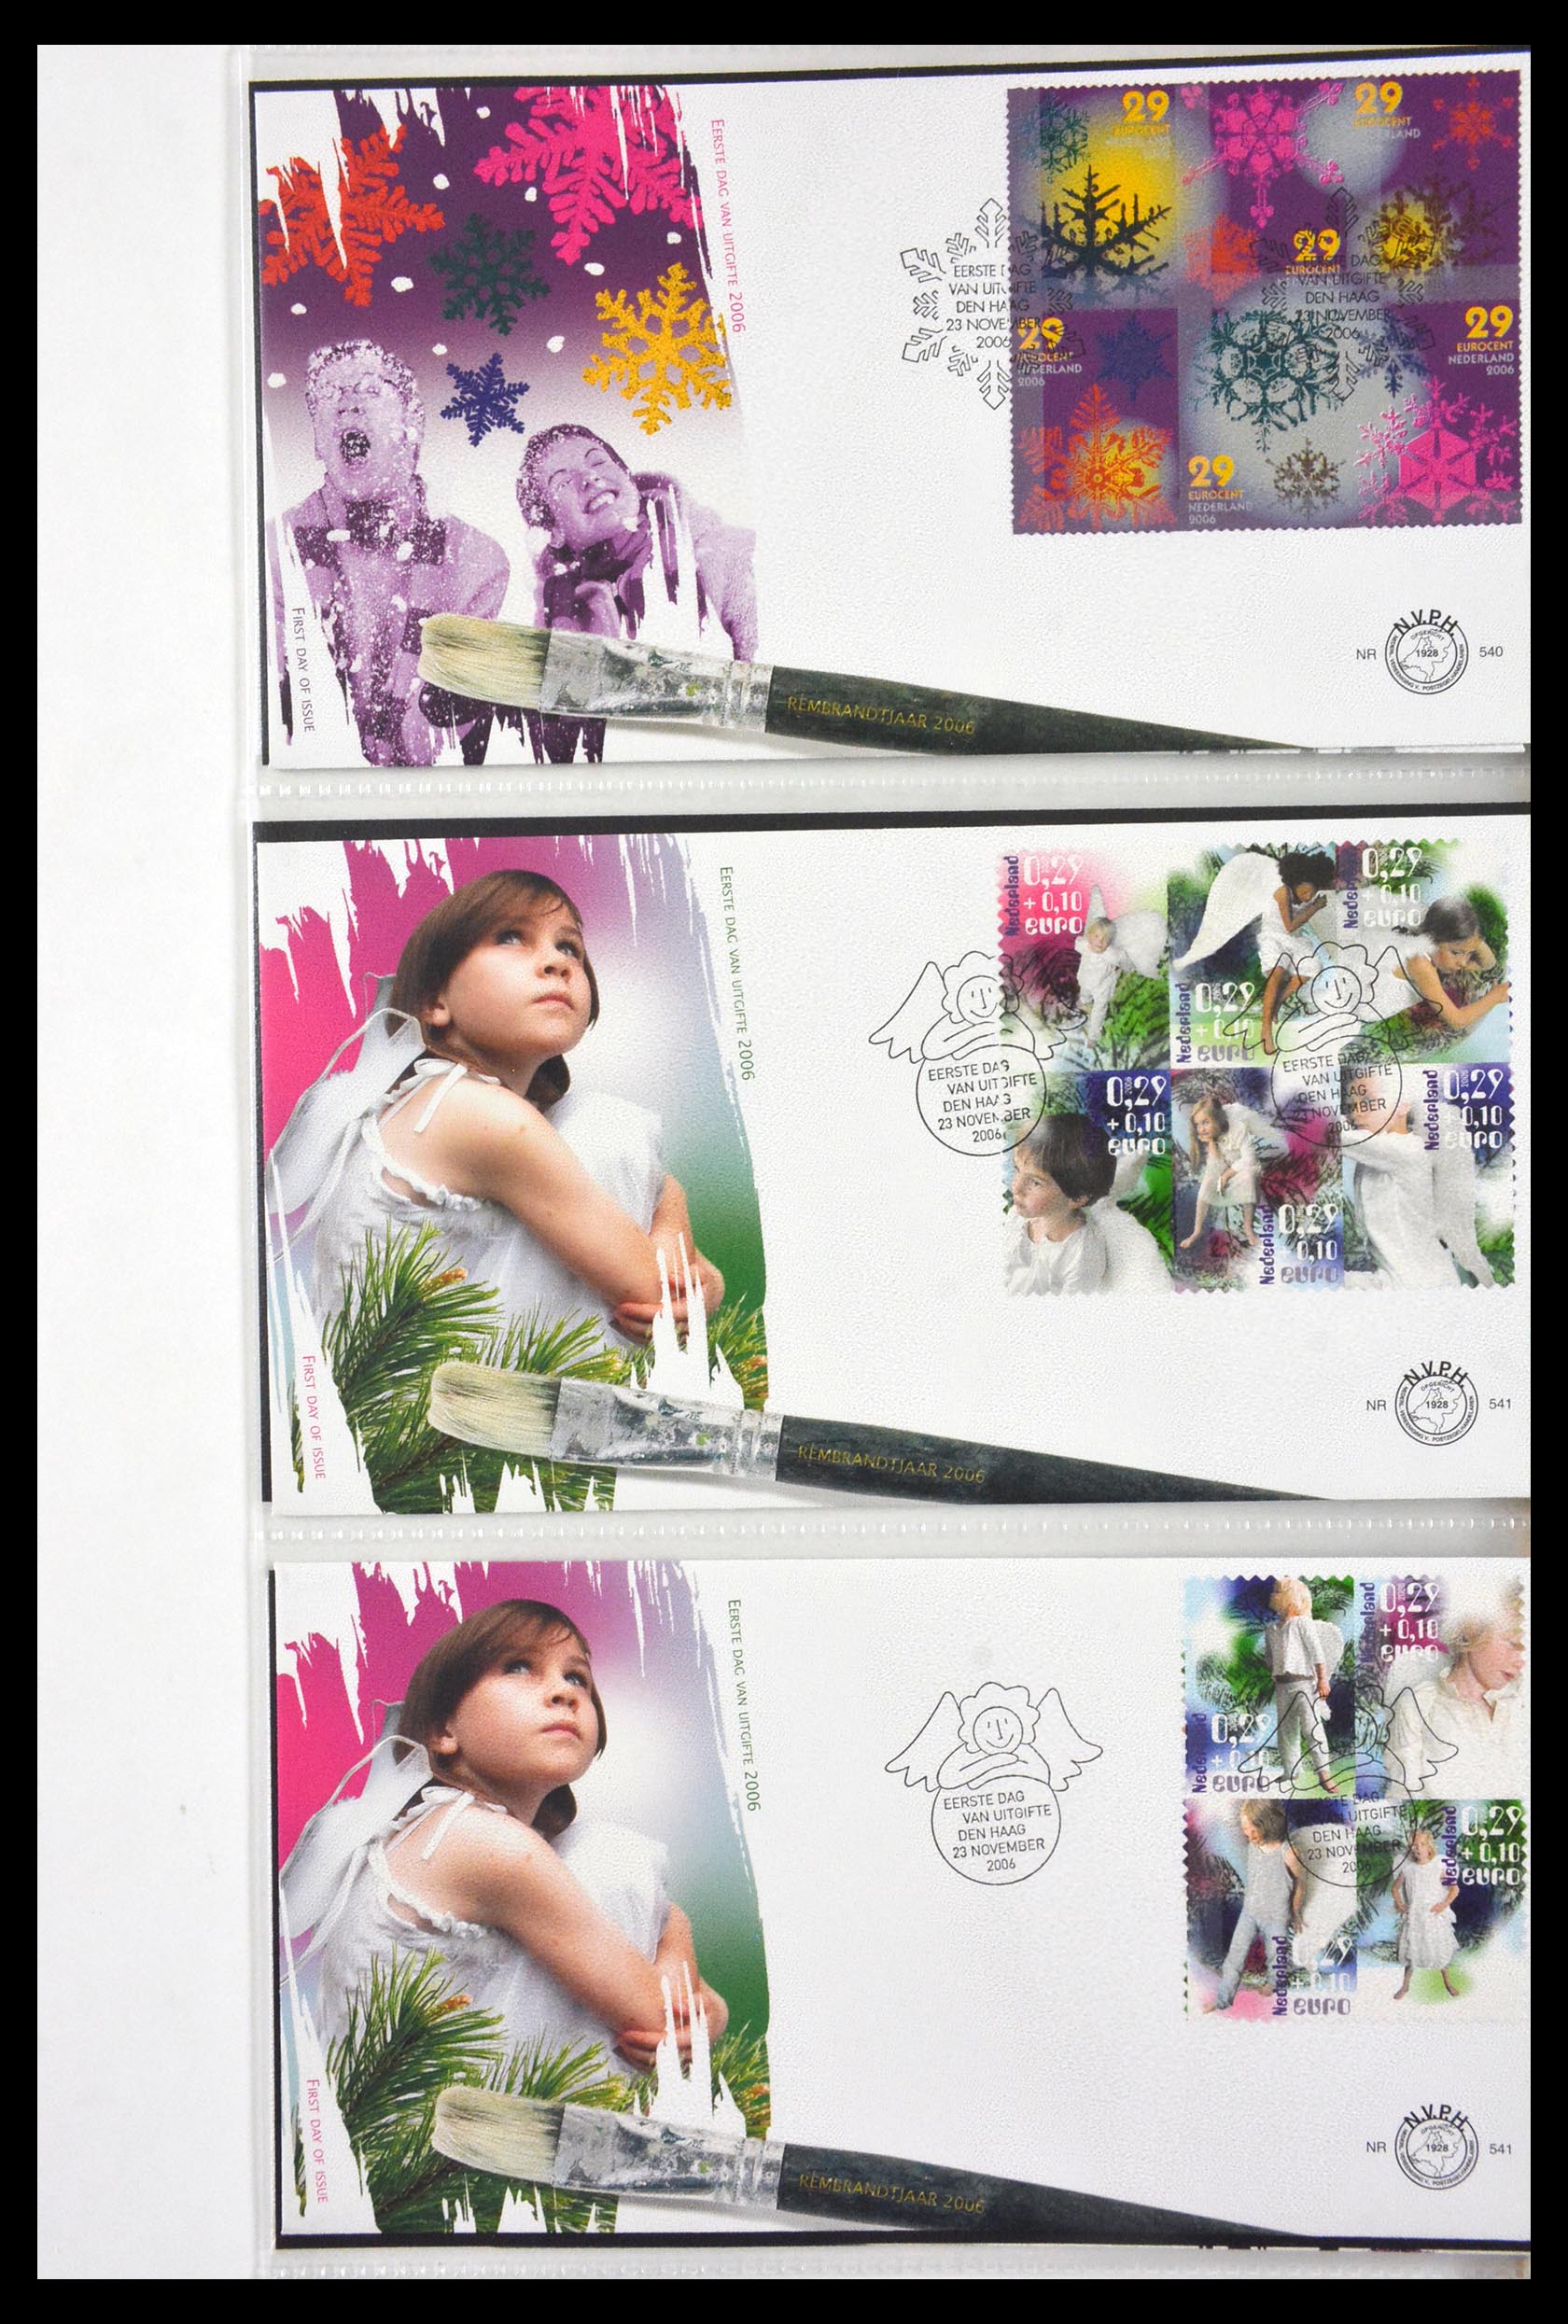 29666 080 - 29666 Netherlands 1997-2011 FDC's.